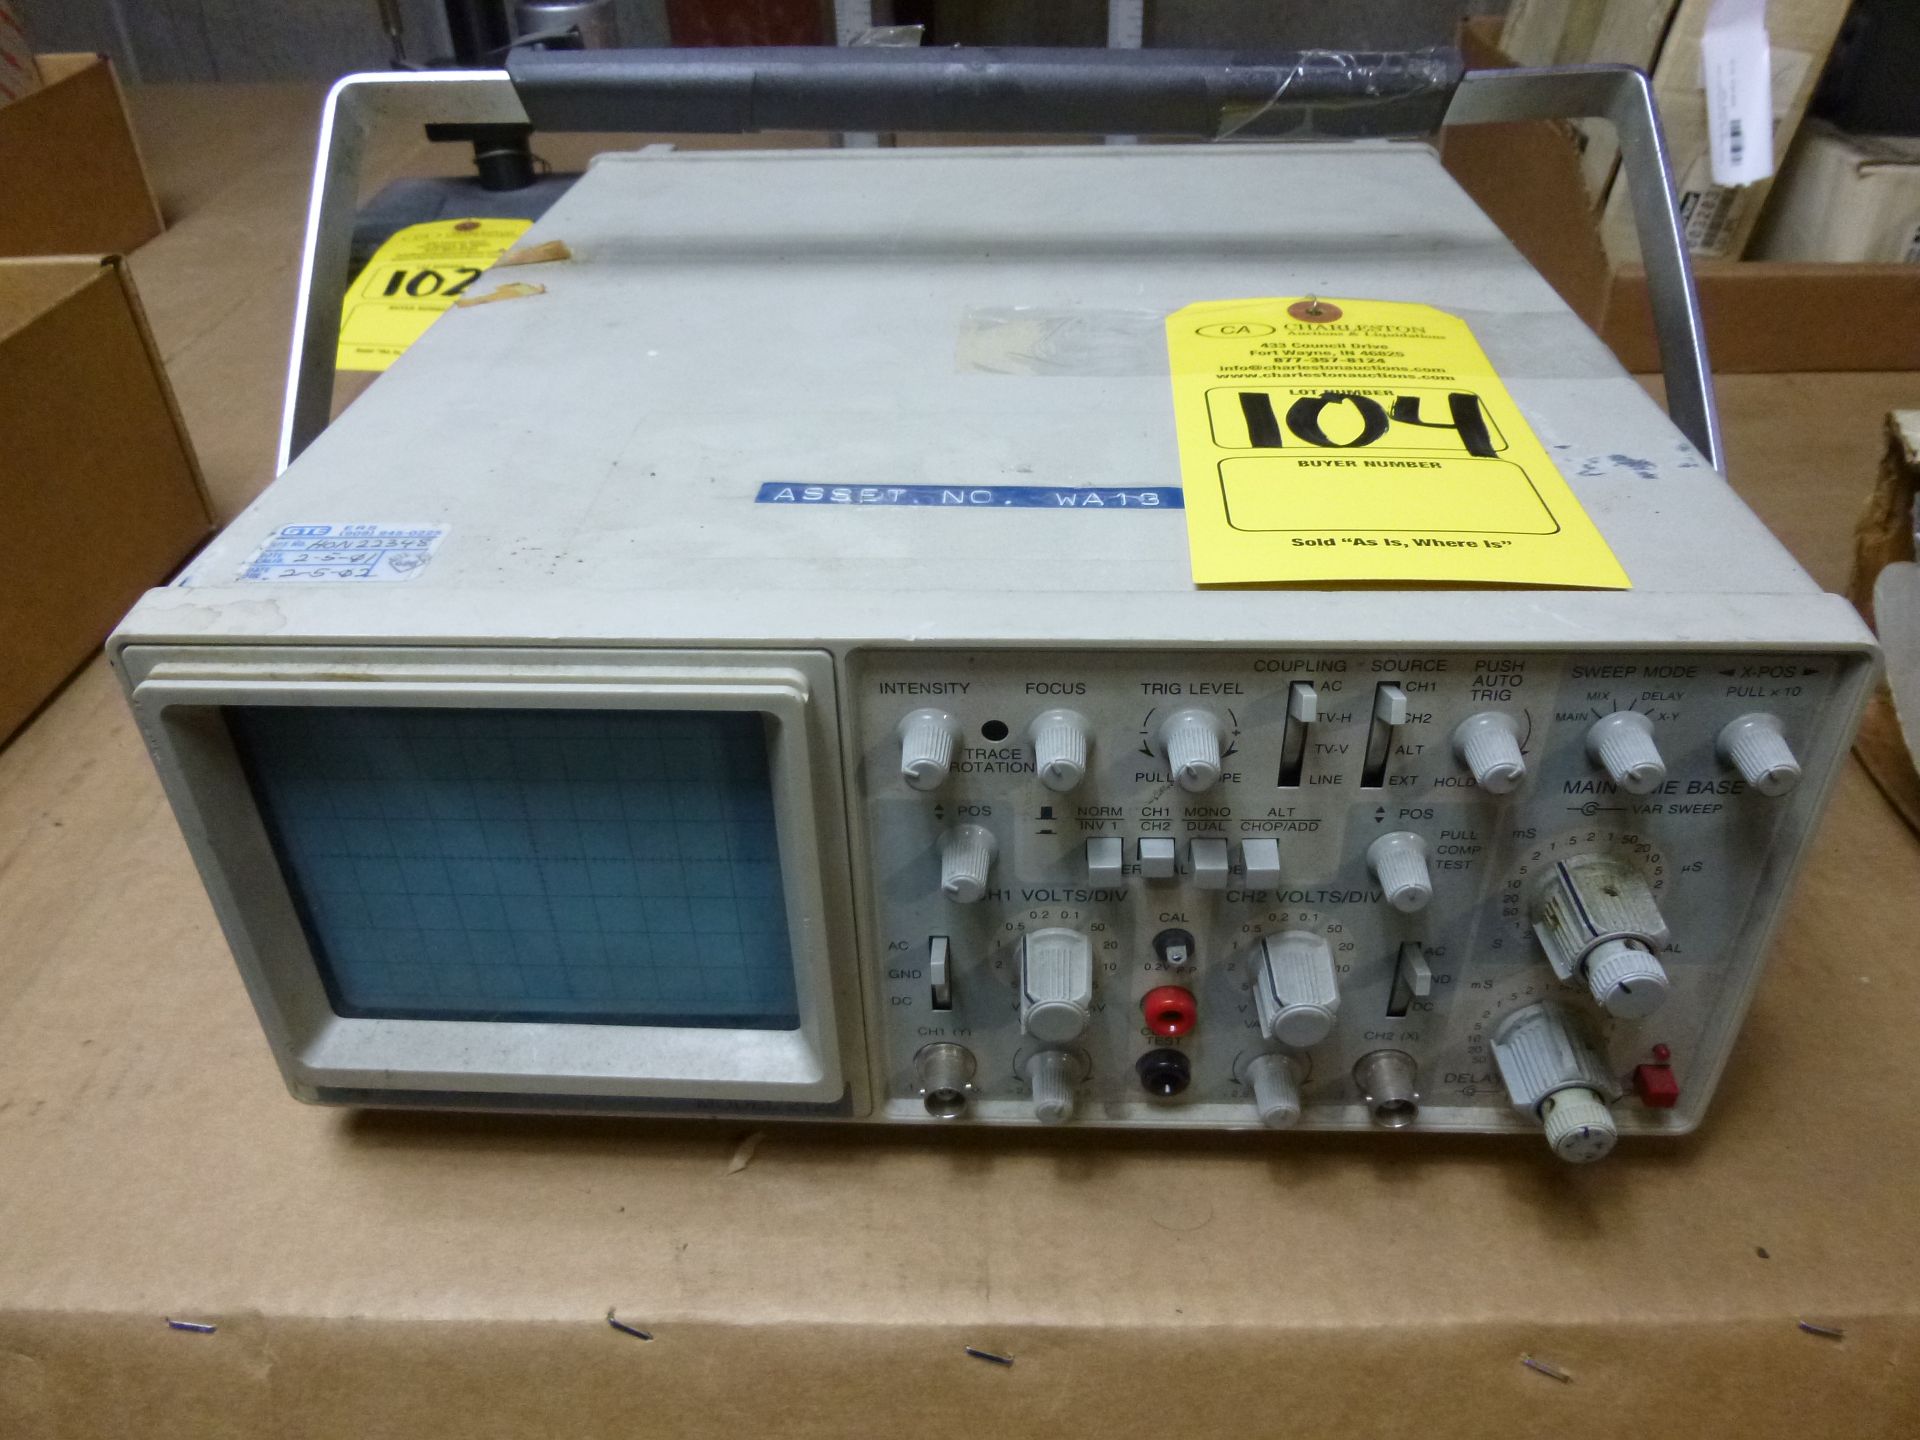 BK Precision Model 2125 Oscilloscope Shipping can be prepared for either ground package or LTL for